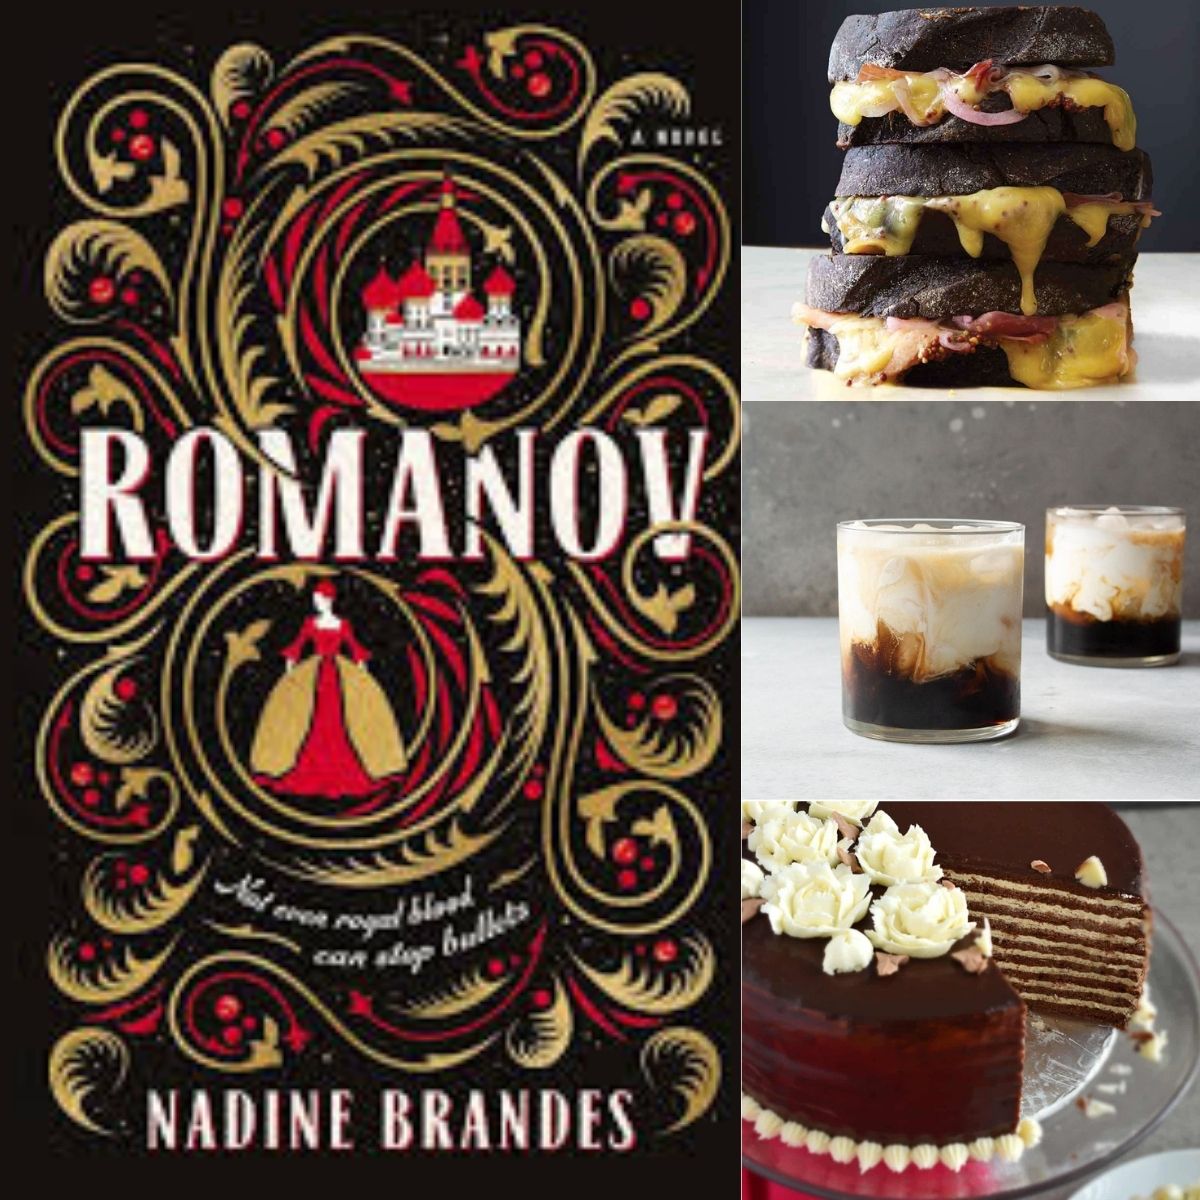 A photo collage shows the Romanov book cover next to 3 photos of Russian recipes.